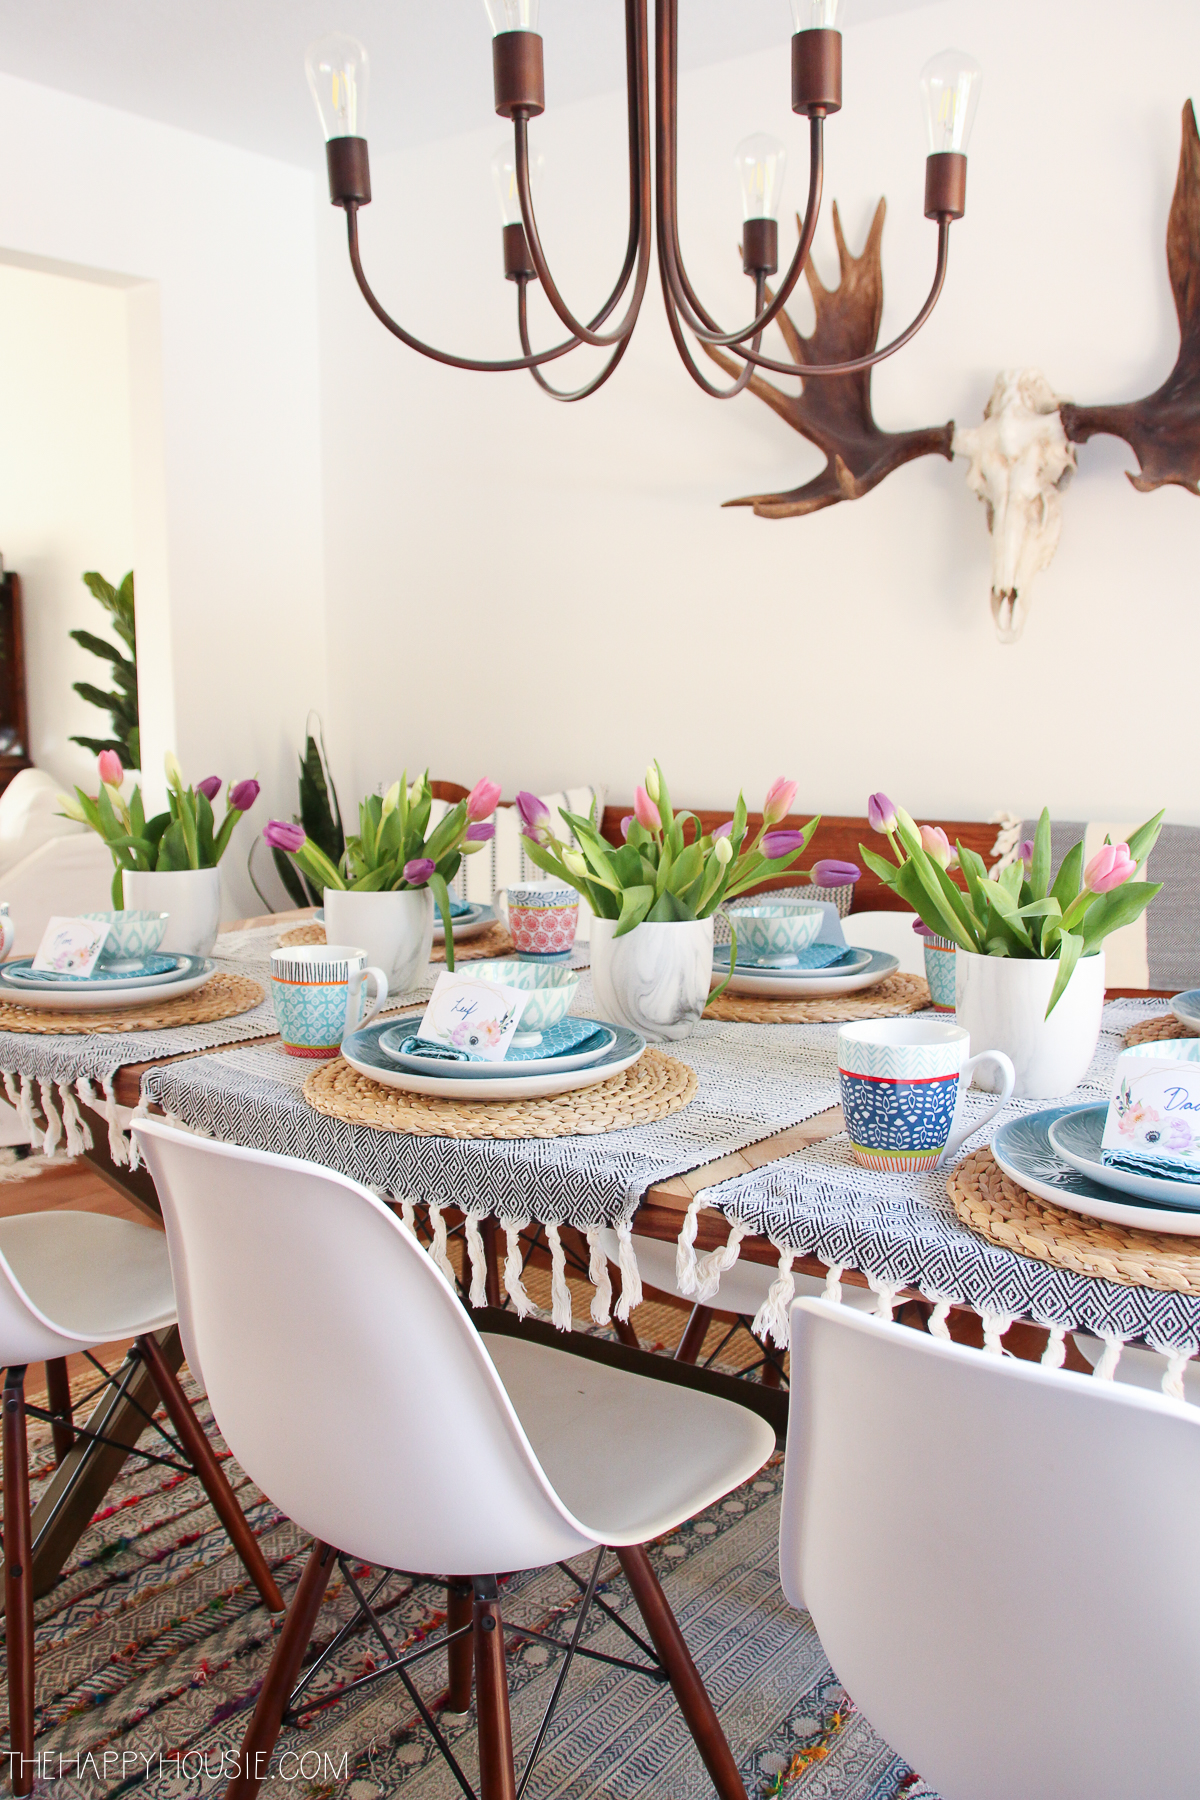 Simple Boho Chic Spring Dining Room & Tablescape